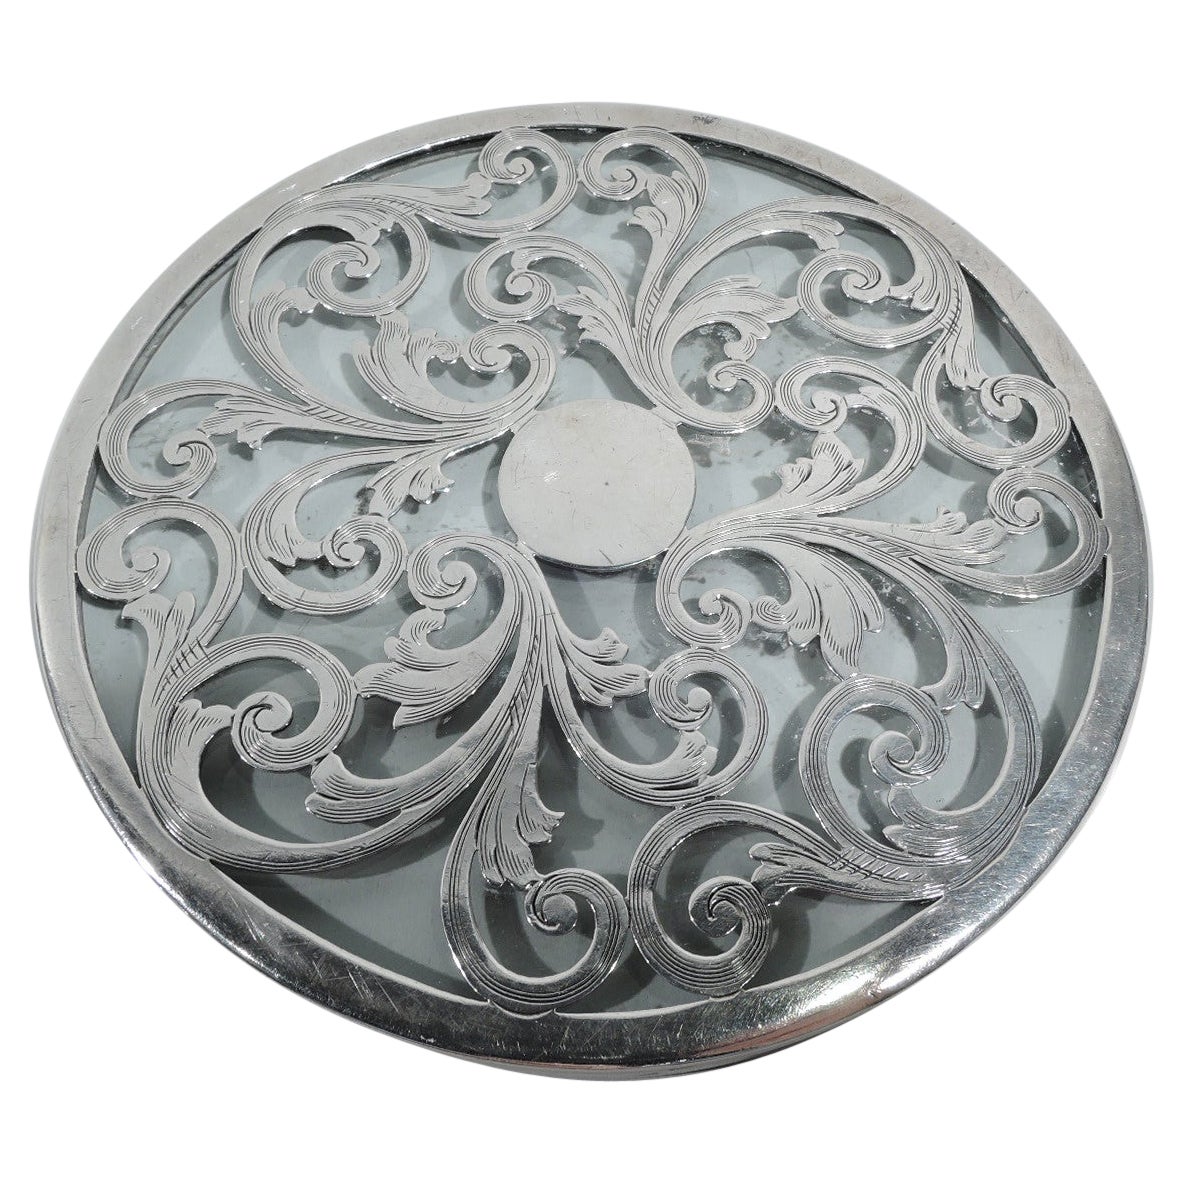 American Art Nouveau Silver Overlay Trivet by The Merrill Shops